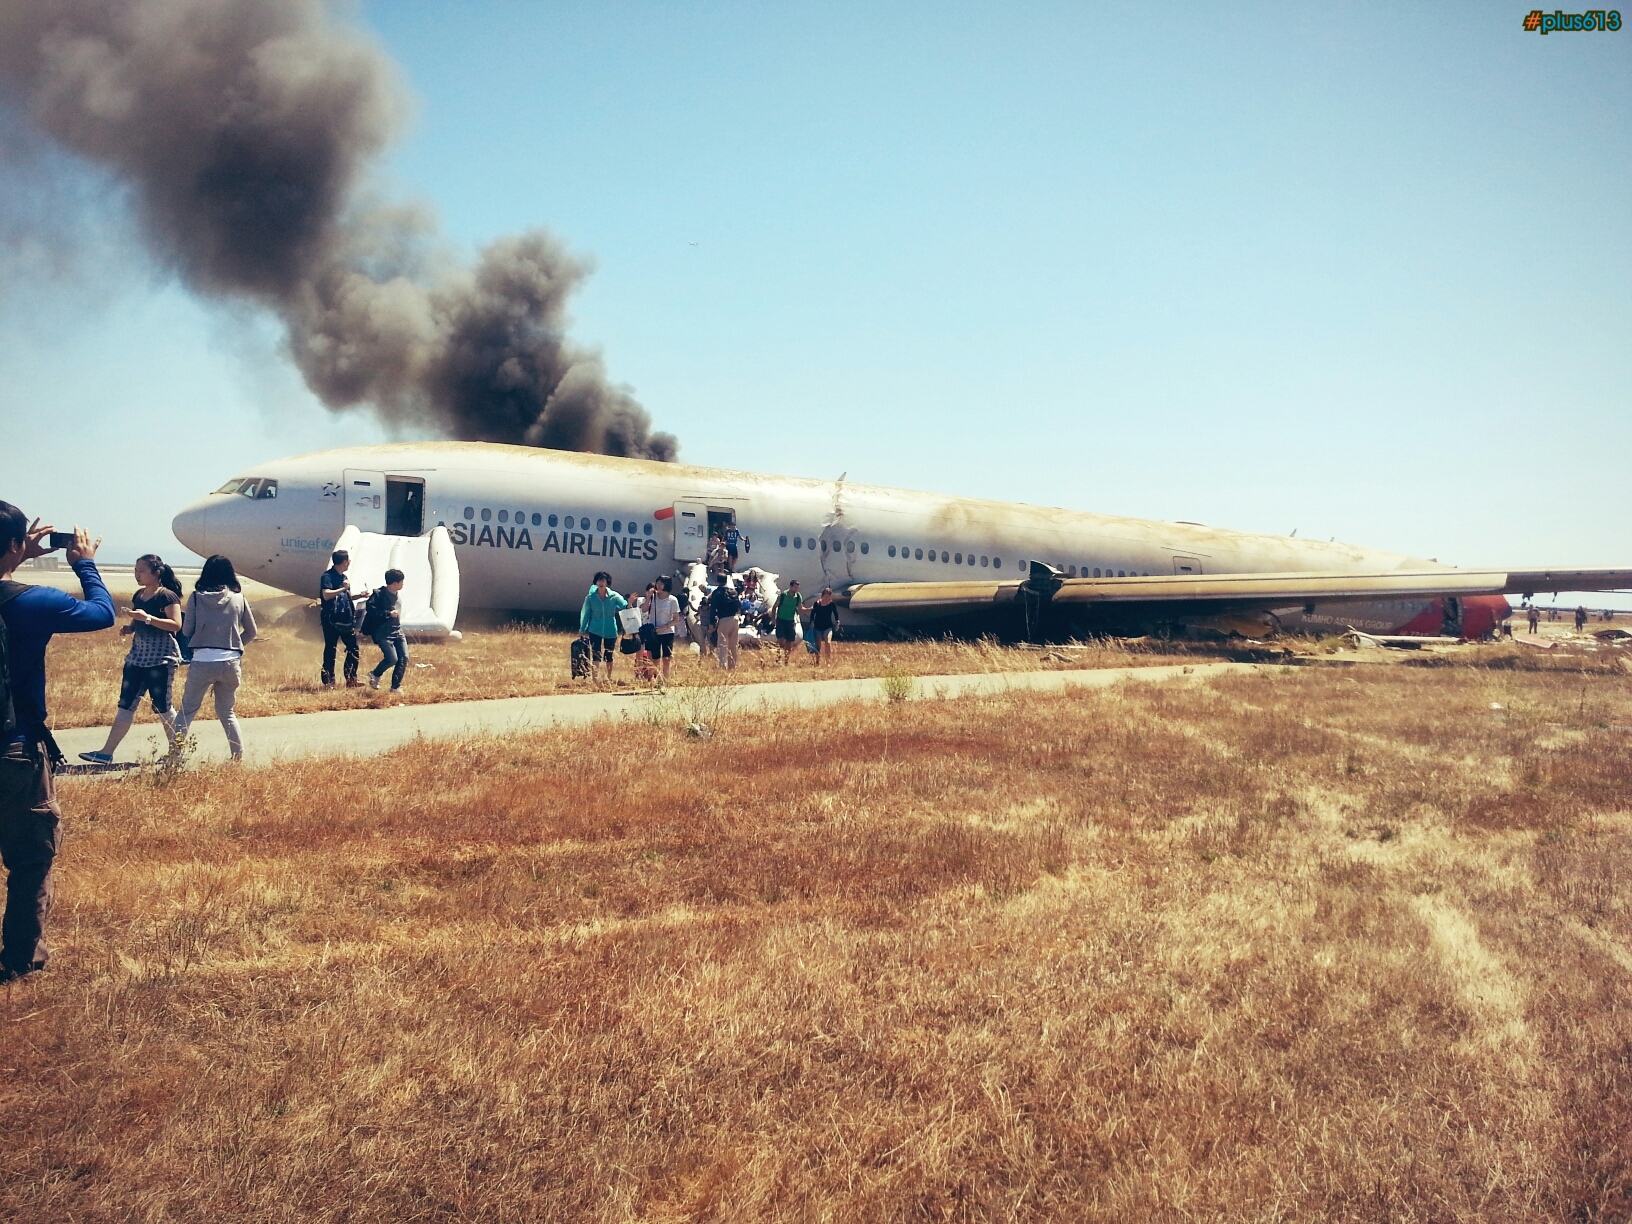 Taken by a passenger moments after crashing, July 6th, 2013, SFO